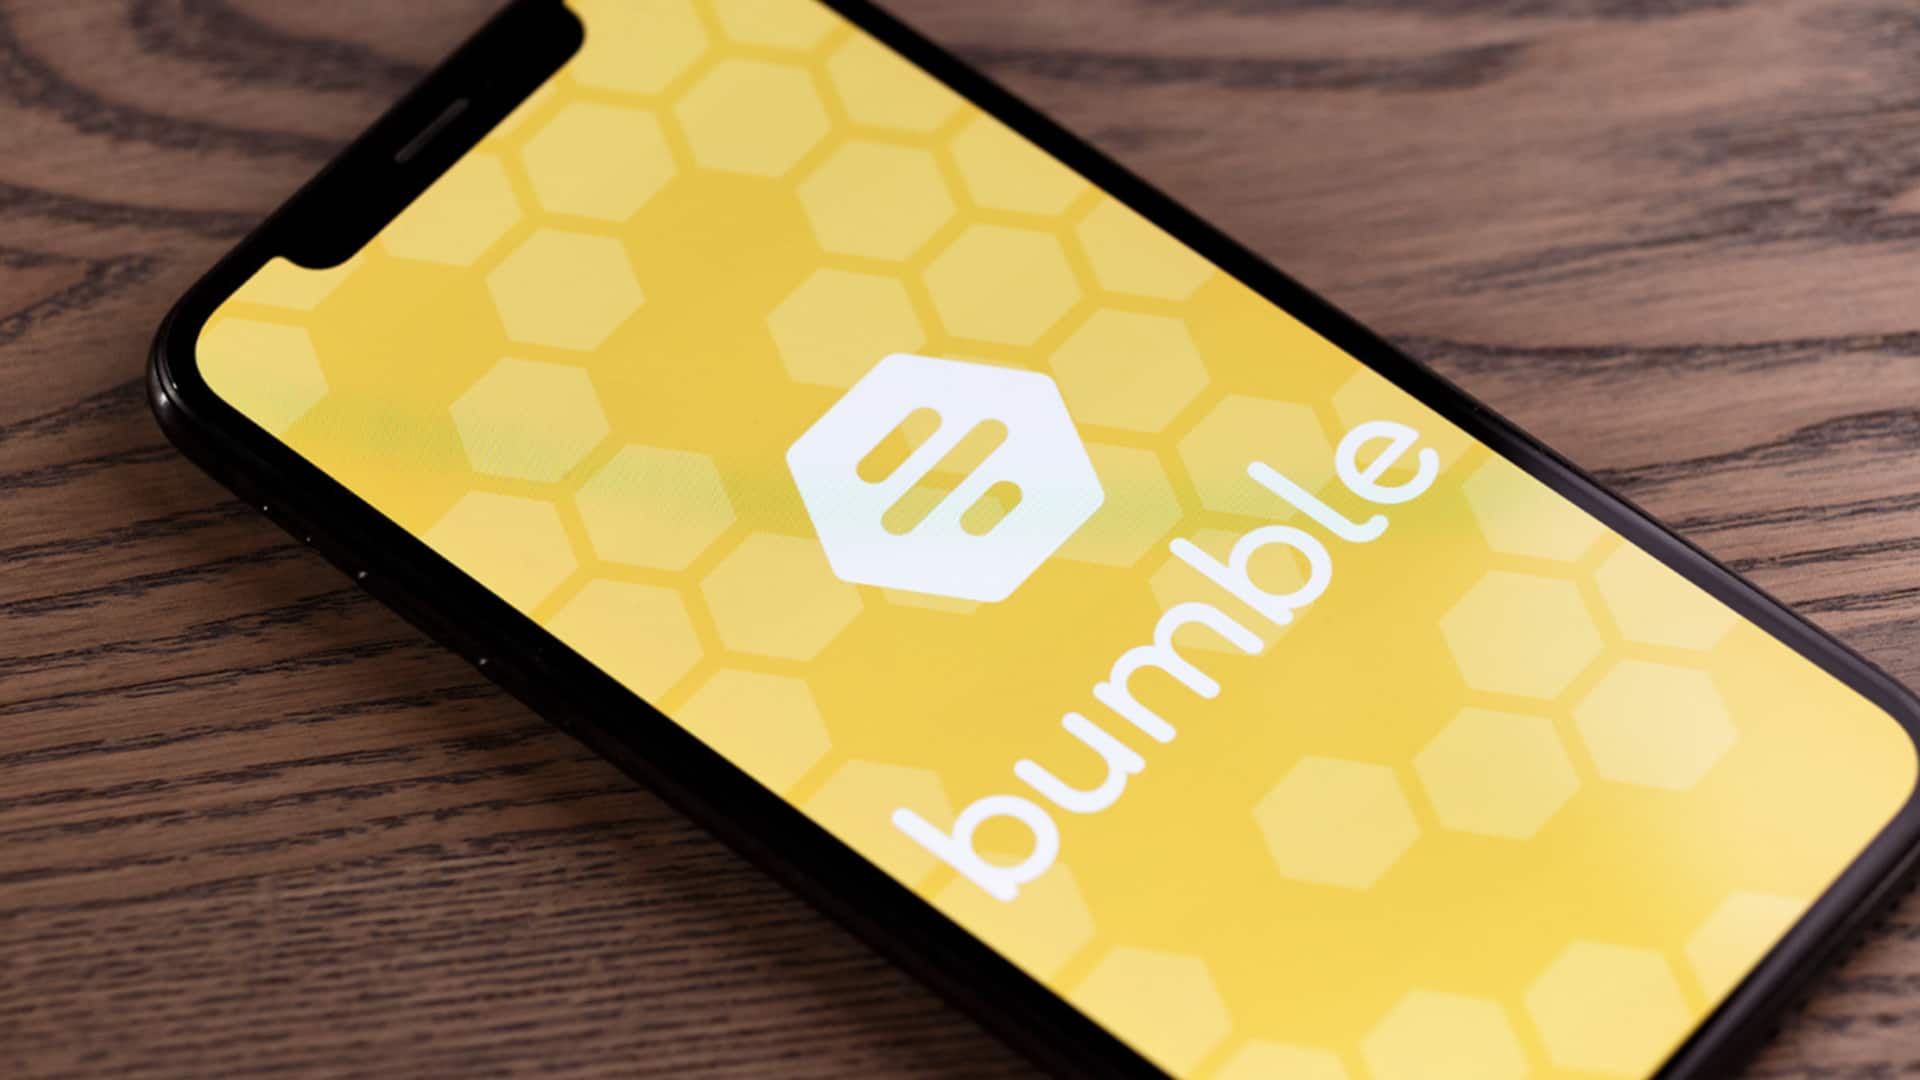 Bumble to fire 30% of its workforce in restructuring move